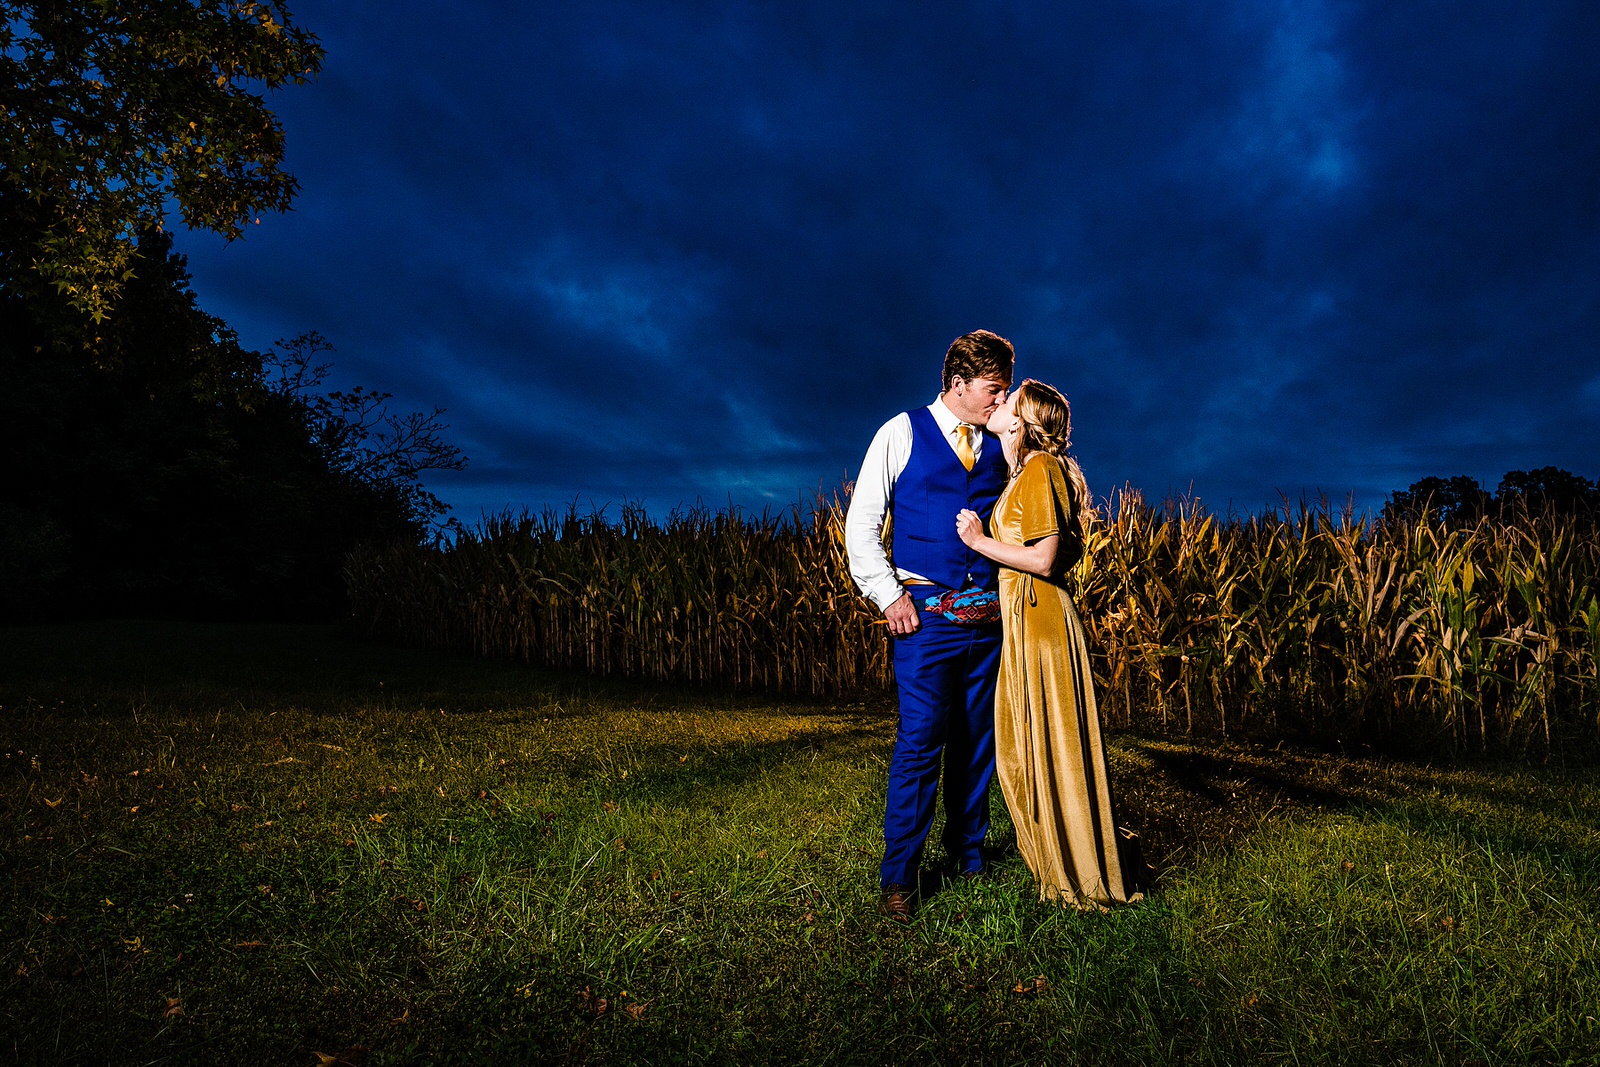 Couple poses for a dramatic portrait at blue hour in front of a corn field